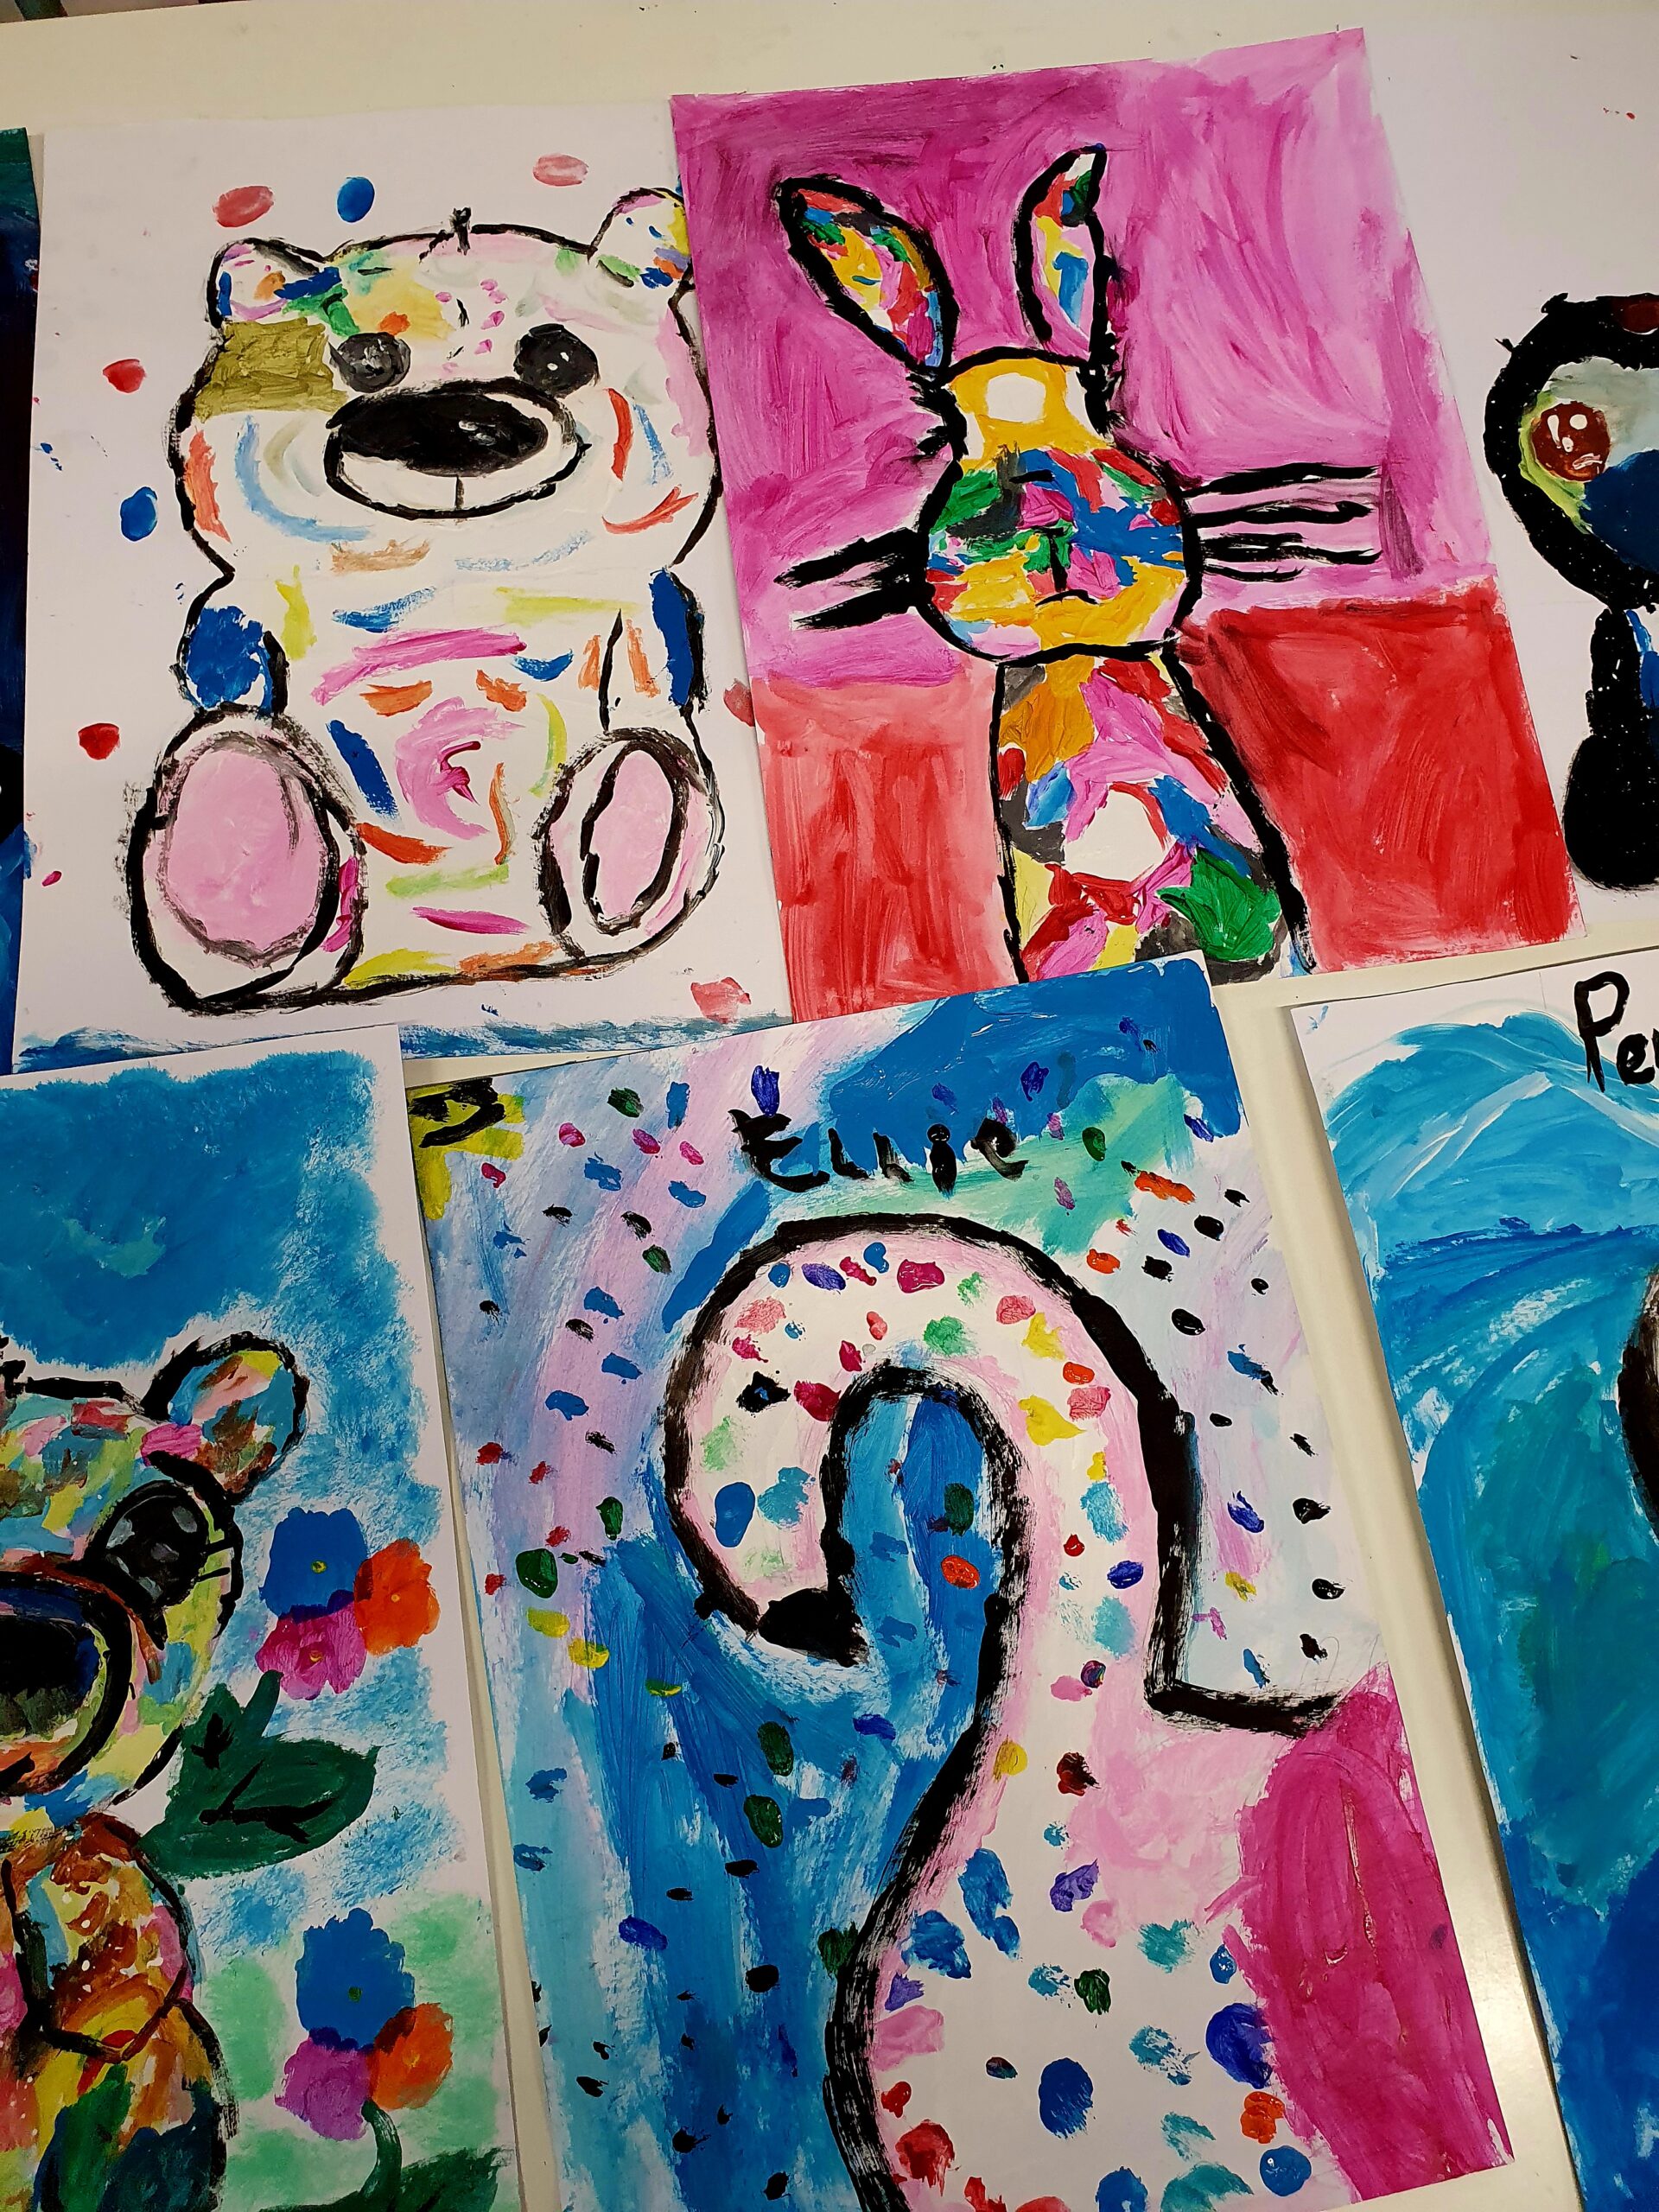 1-Session: ONLINE DRAWING CLASS FOR KIDS (AGES 8-11) - The Art Studio NY